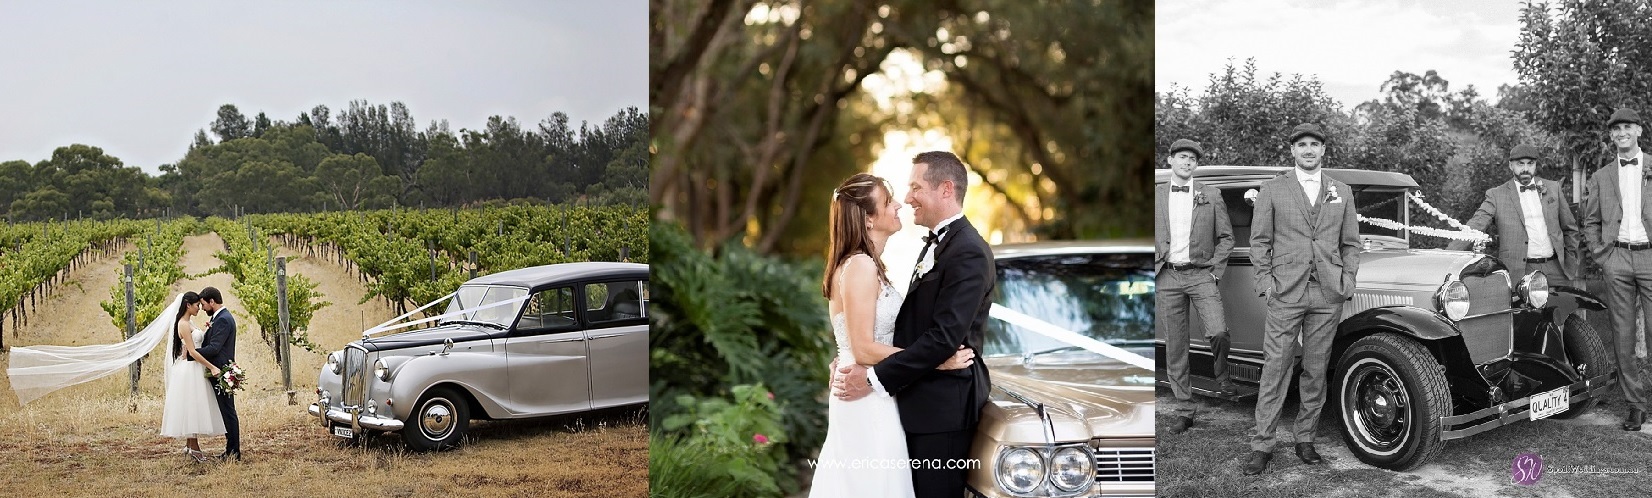 Perth Limo Hire and Classic Wedding Car Hire